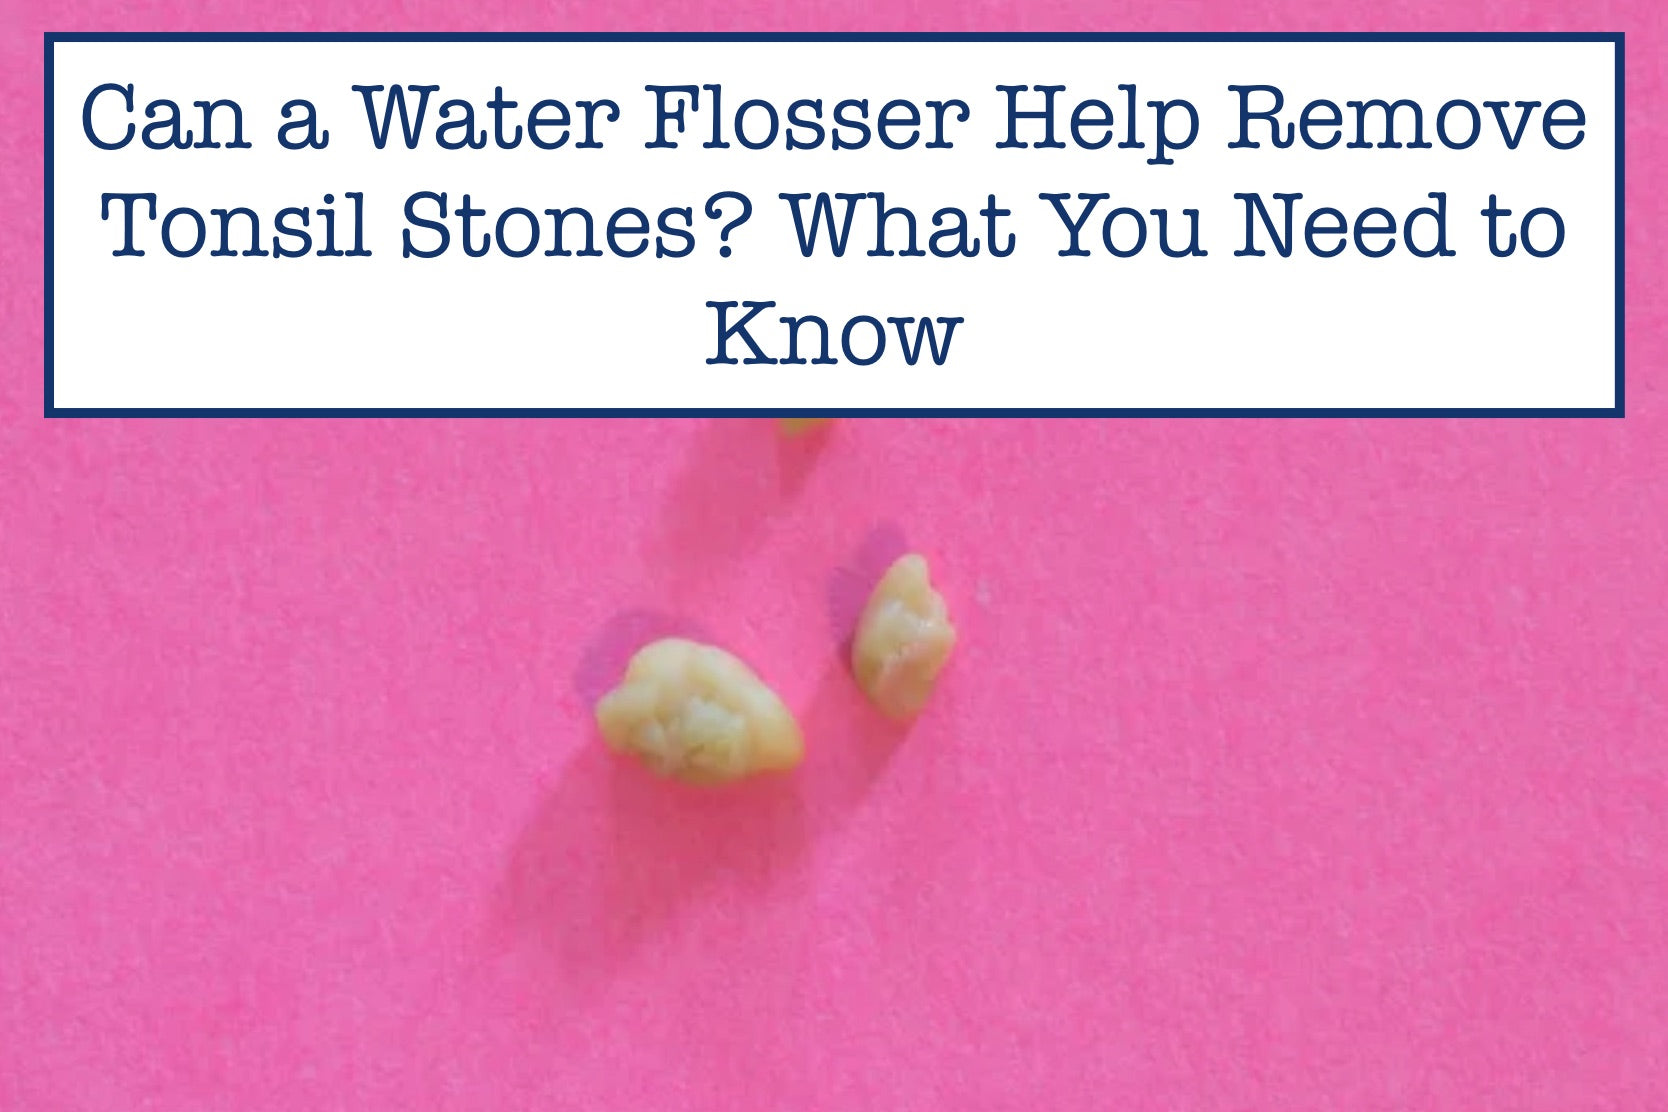 Can a Water Flosser Help Remove Tonsil Stones? What You Need to Know